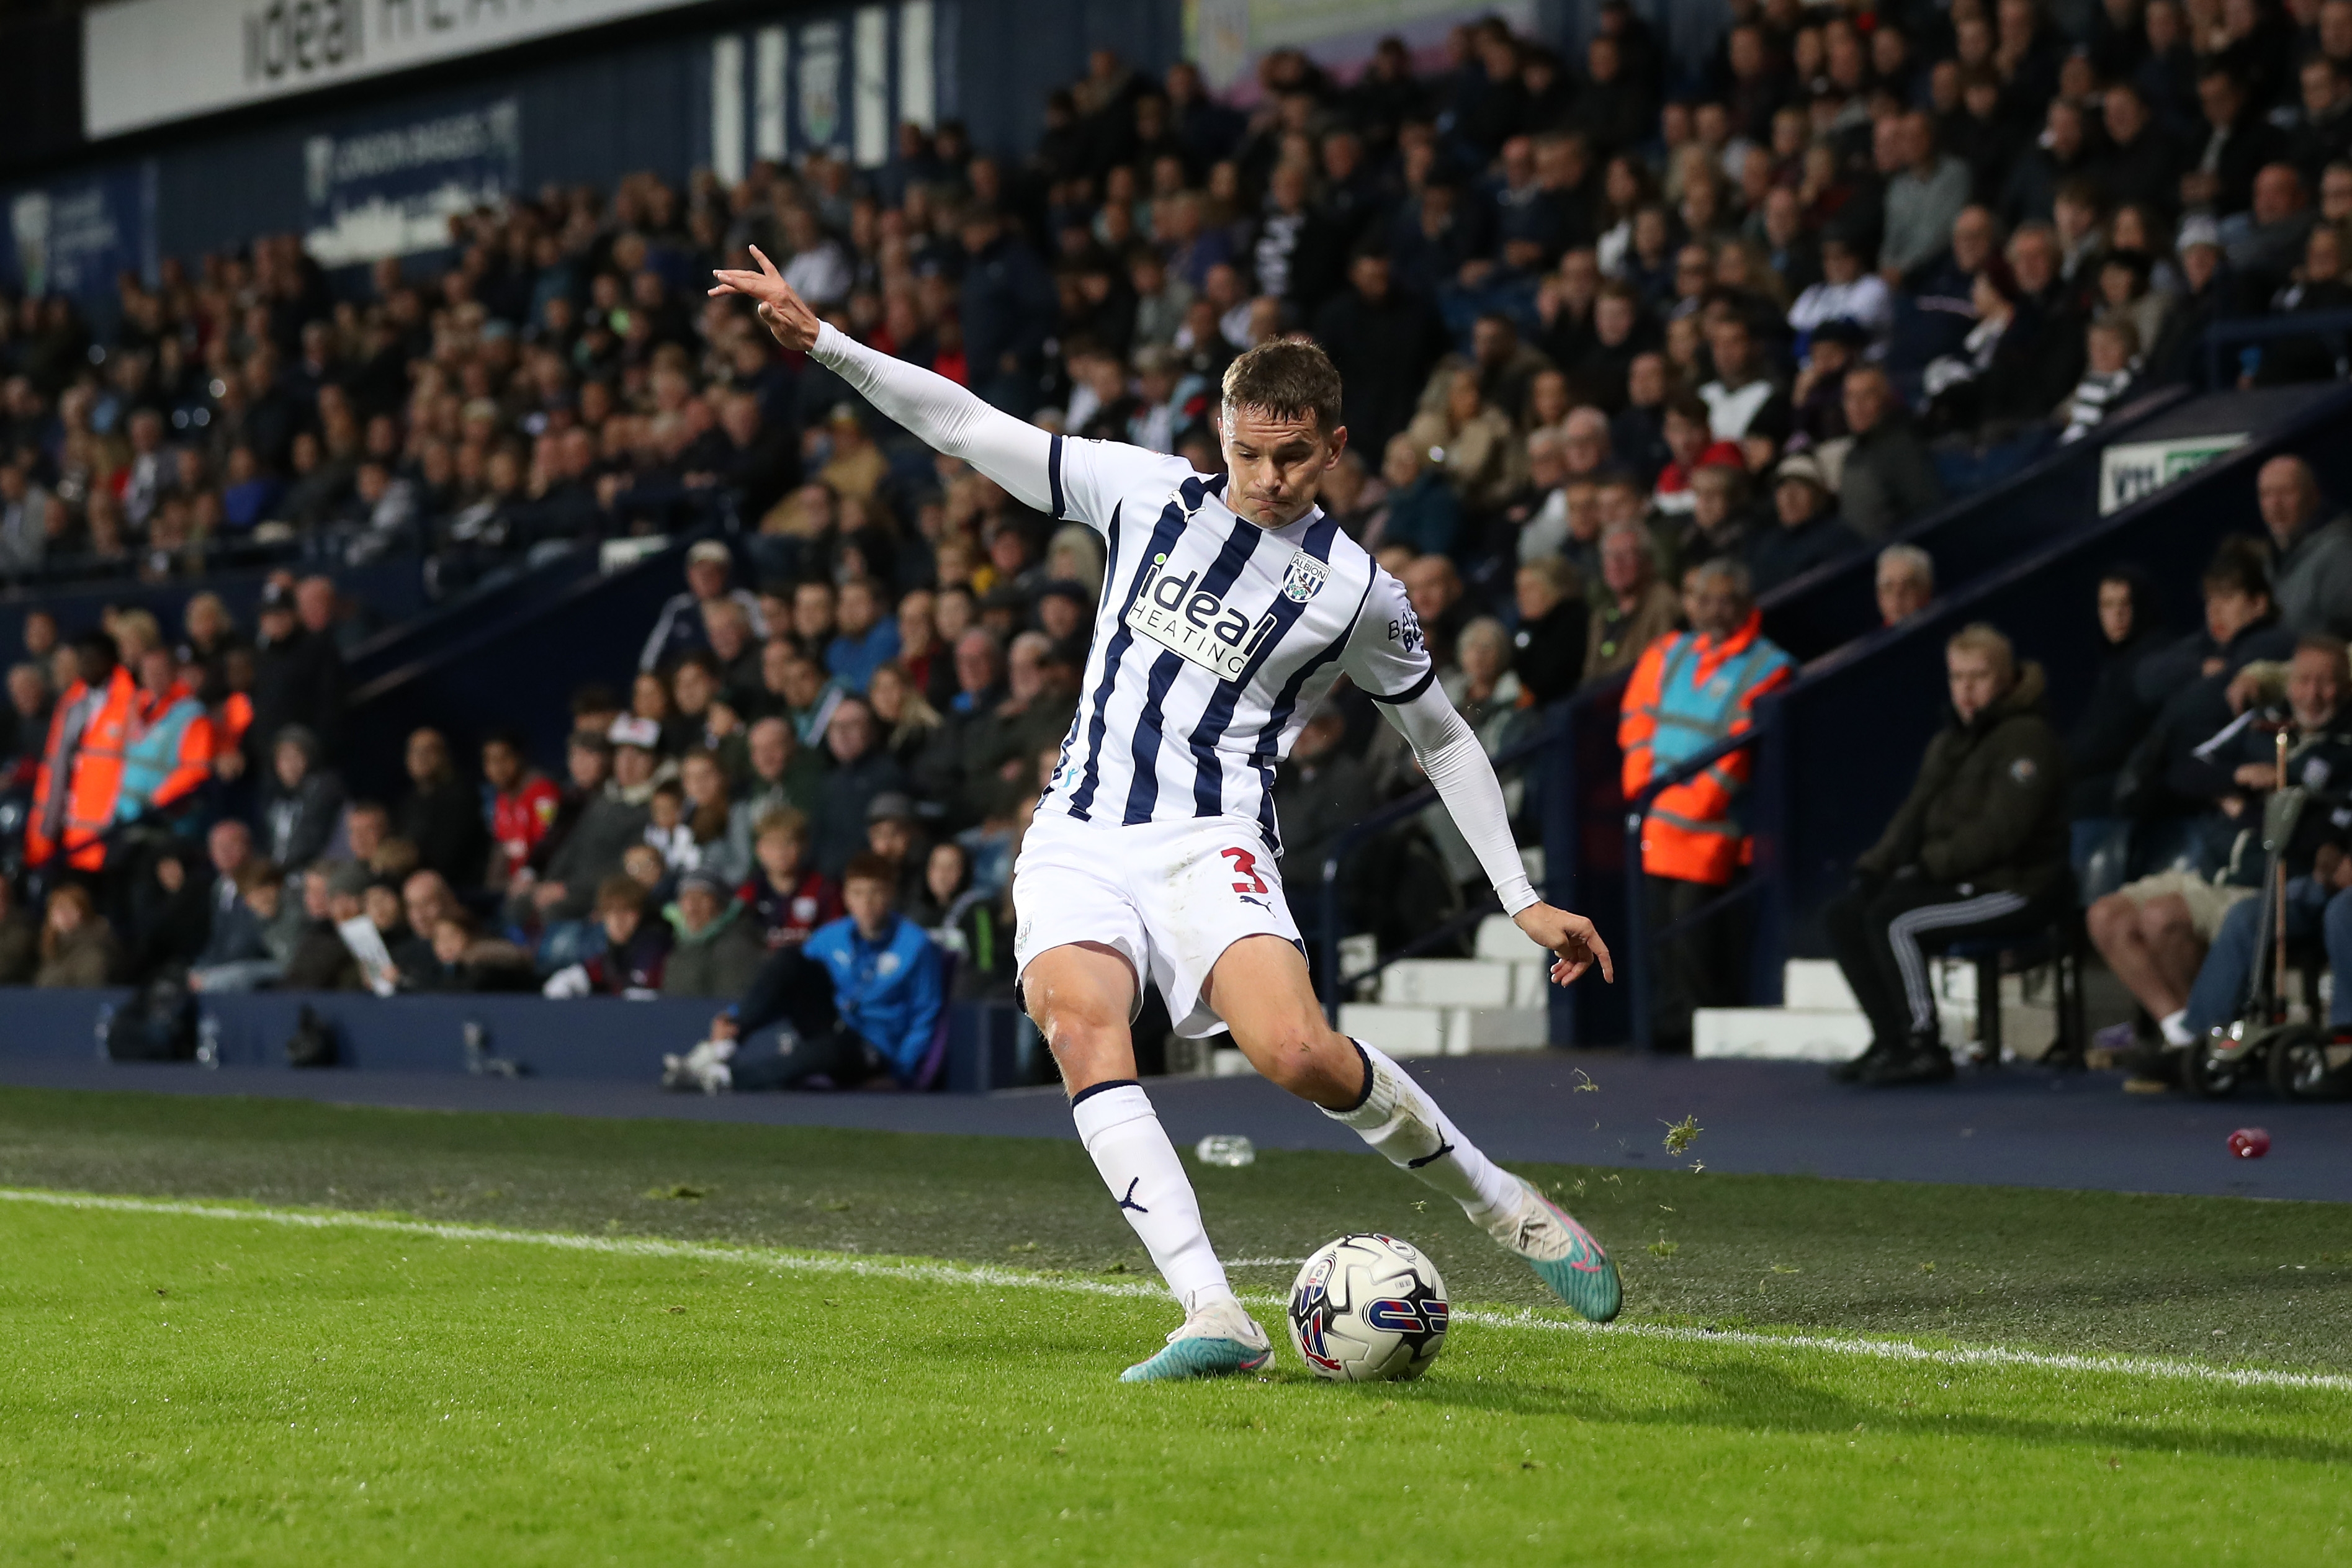 Conor Townsend crosses the ball against Sheffield Wednesday